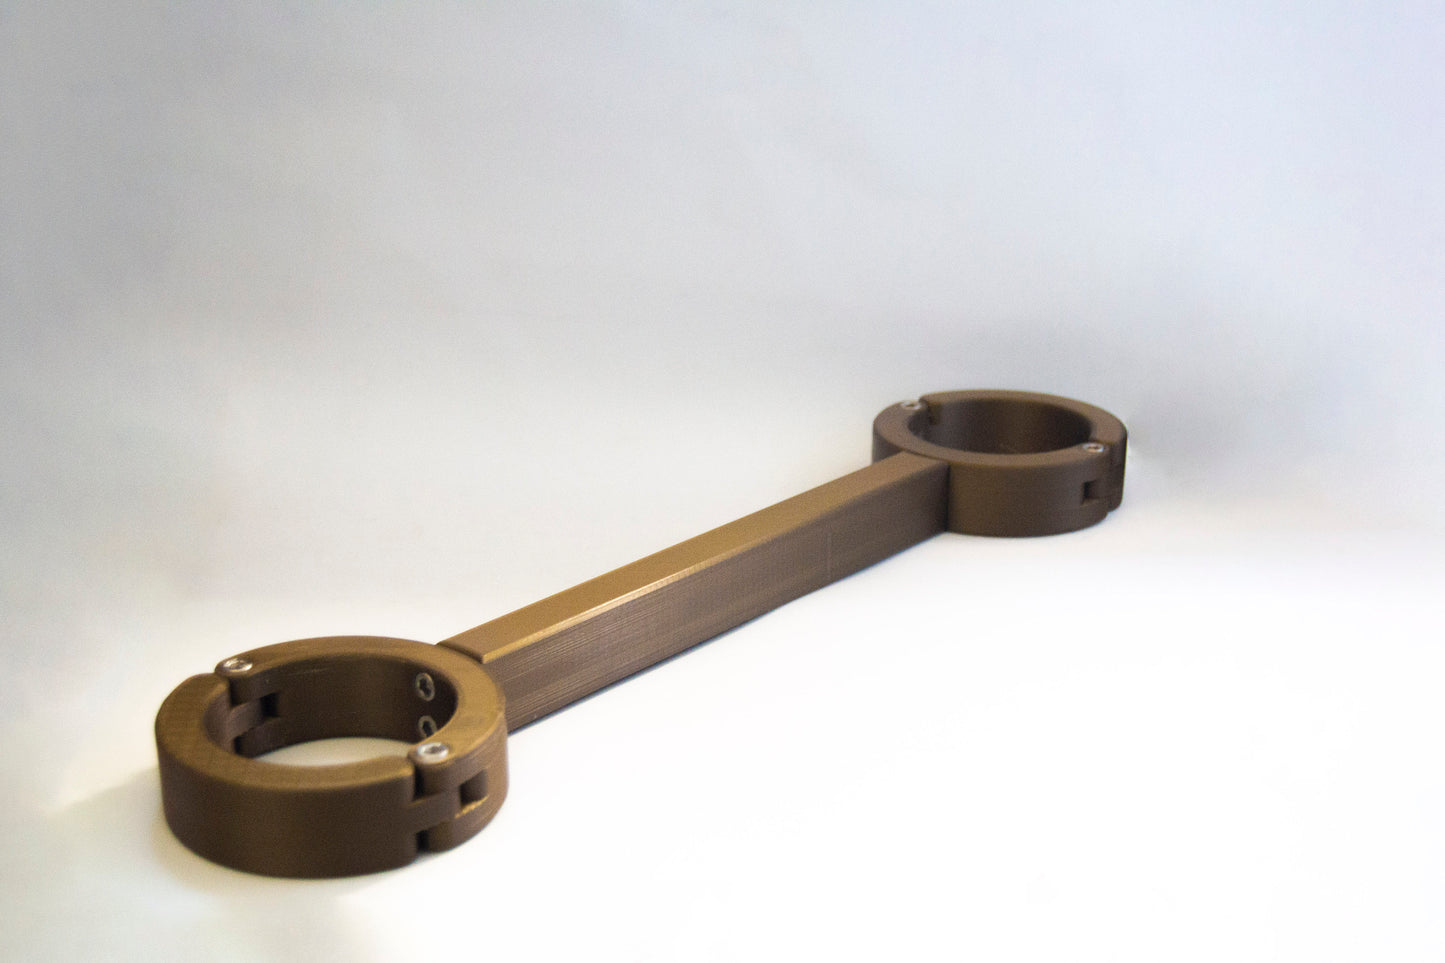 Spreader Bar for Elbows, Wrists or Ankles | 3D Printed - XPrint3D